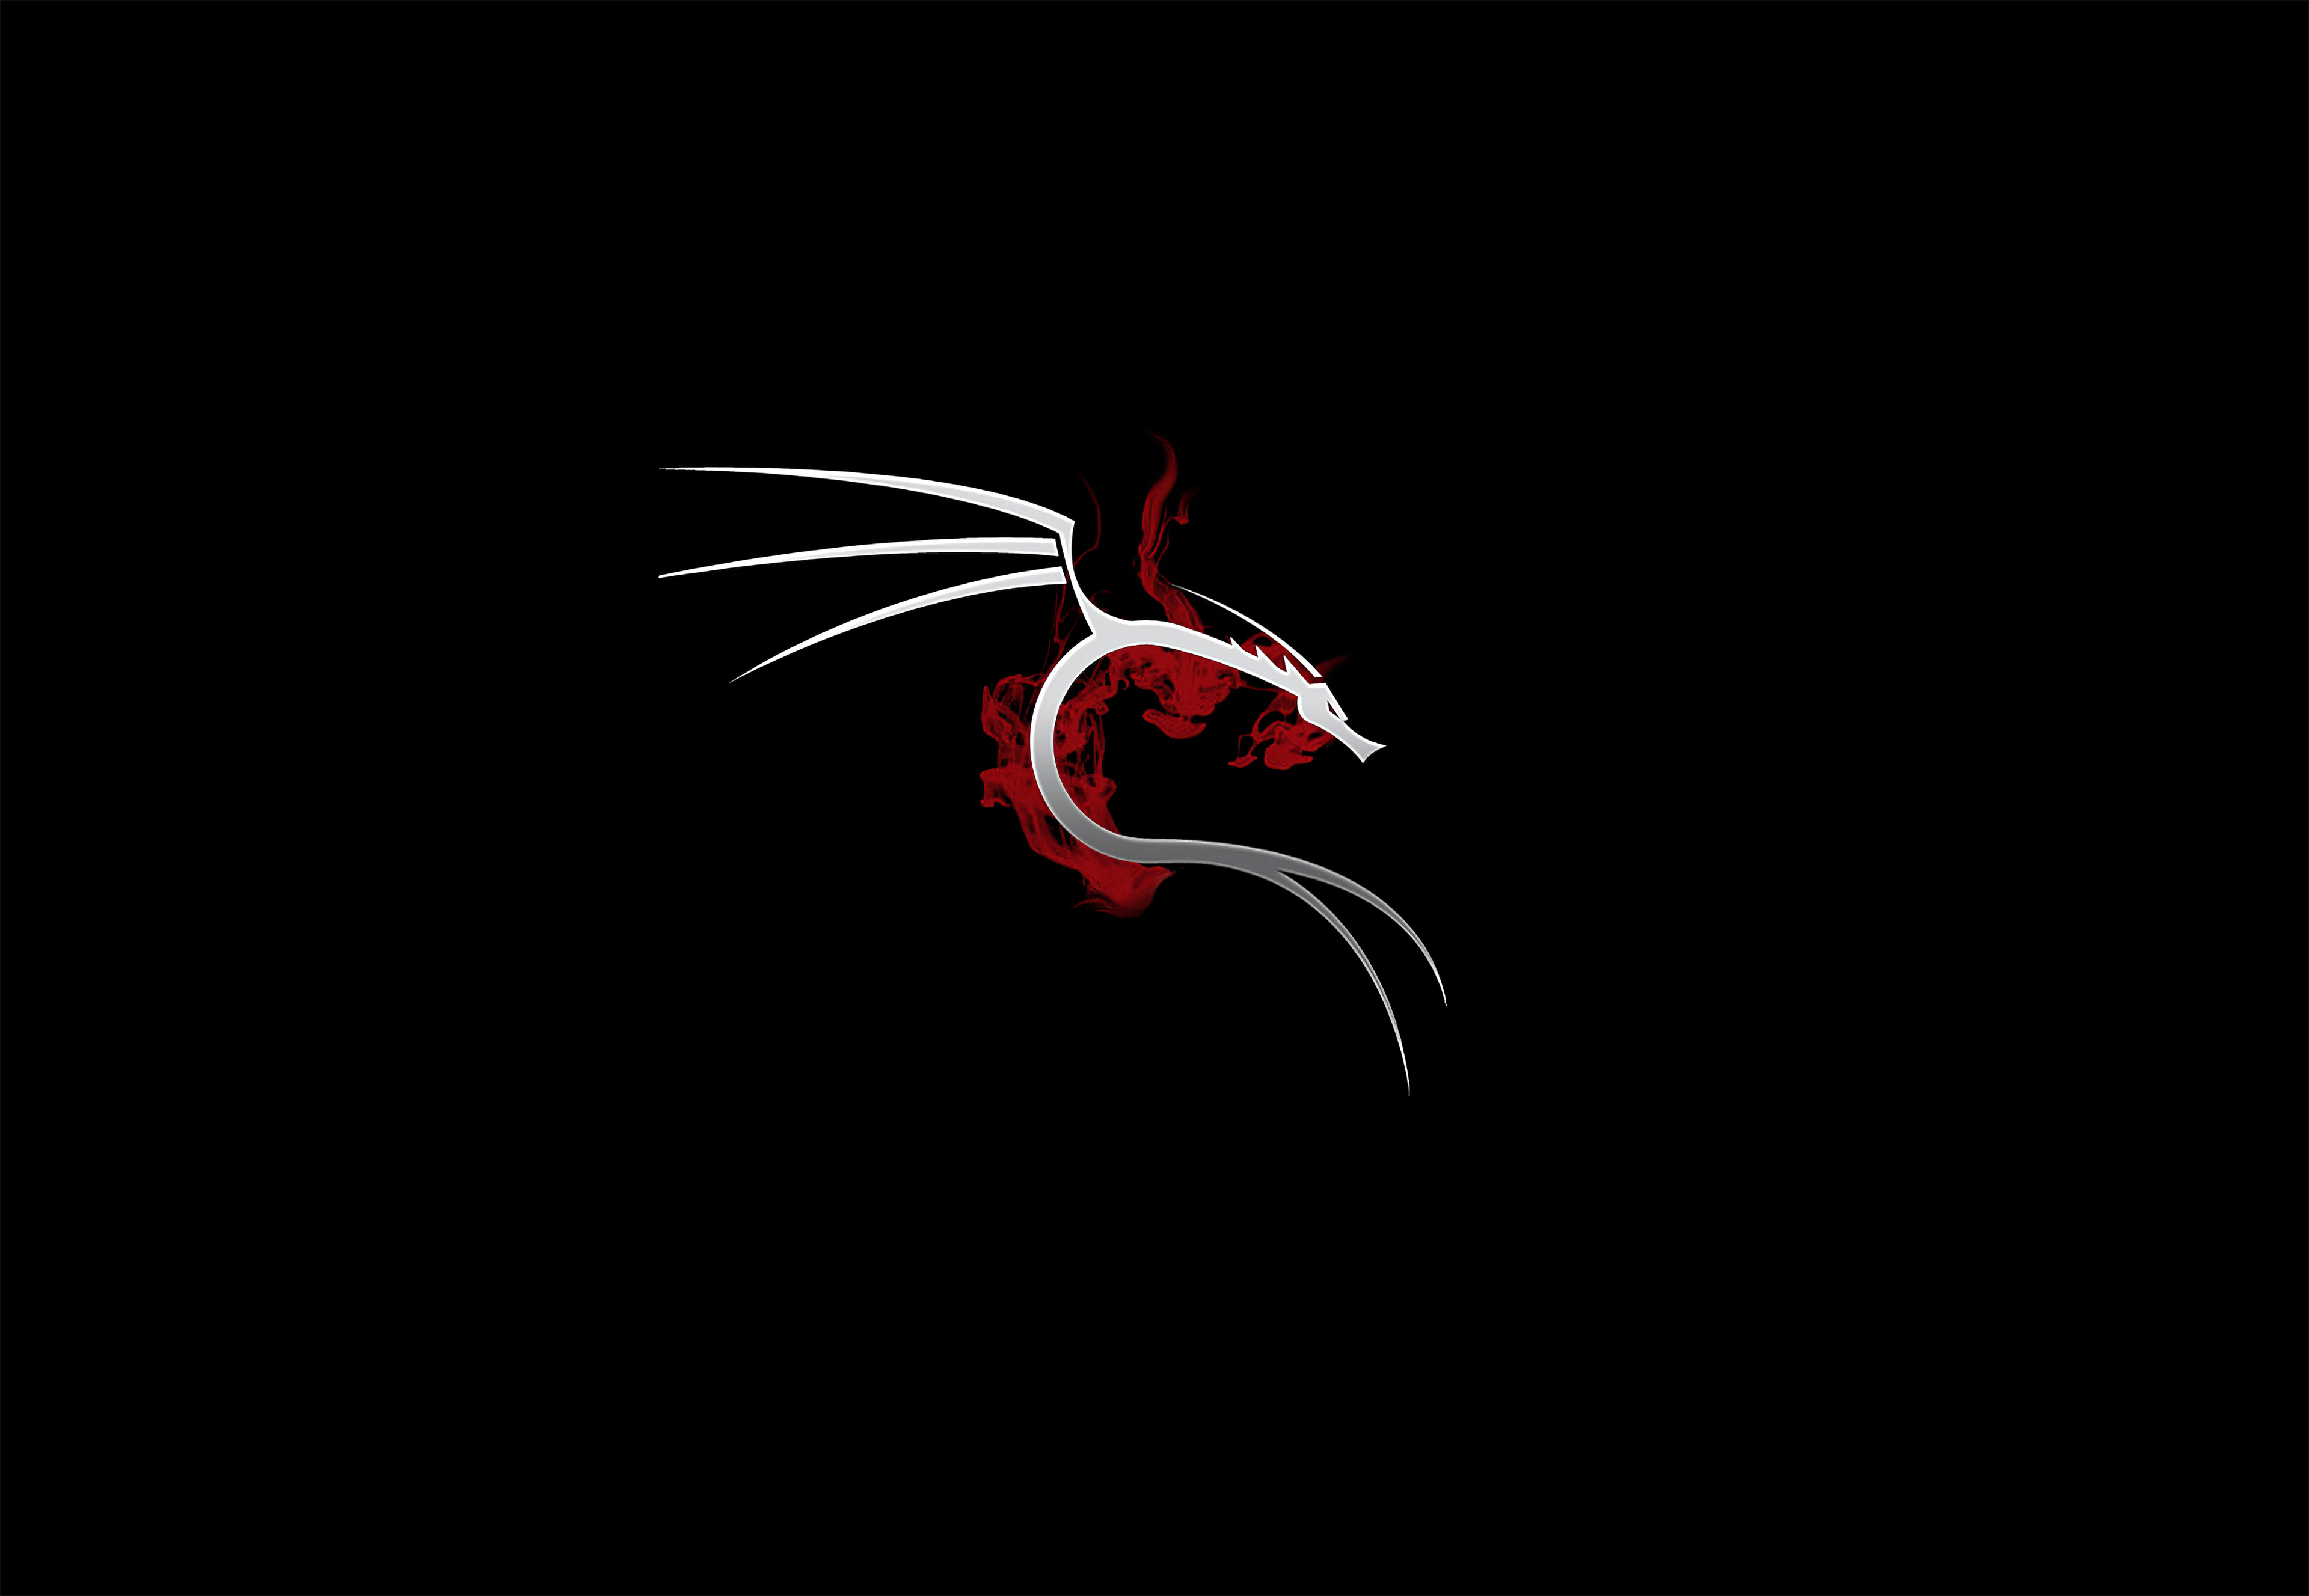 2560x1600 Kali Linux 4k 2560x1600 Resolution Hd 4k Wallpapers Images Backgrounds Photos And Pictures